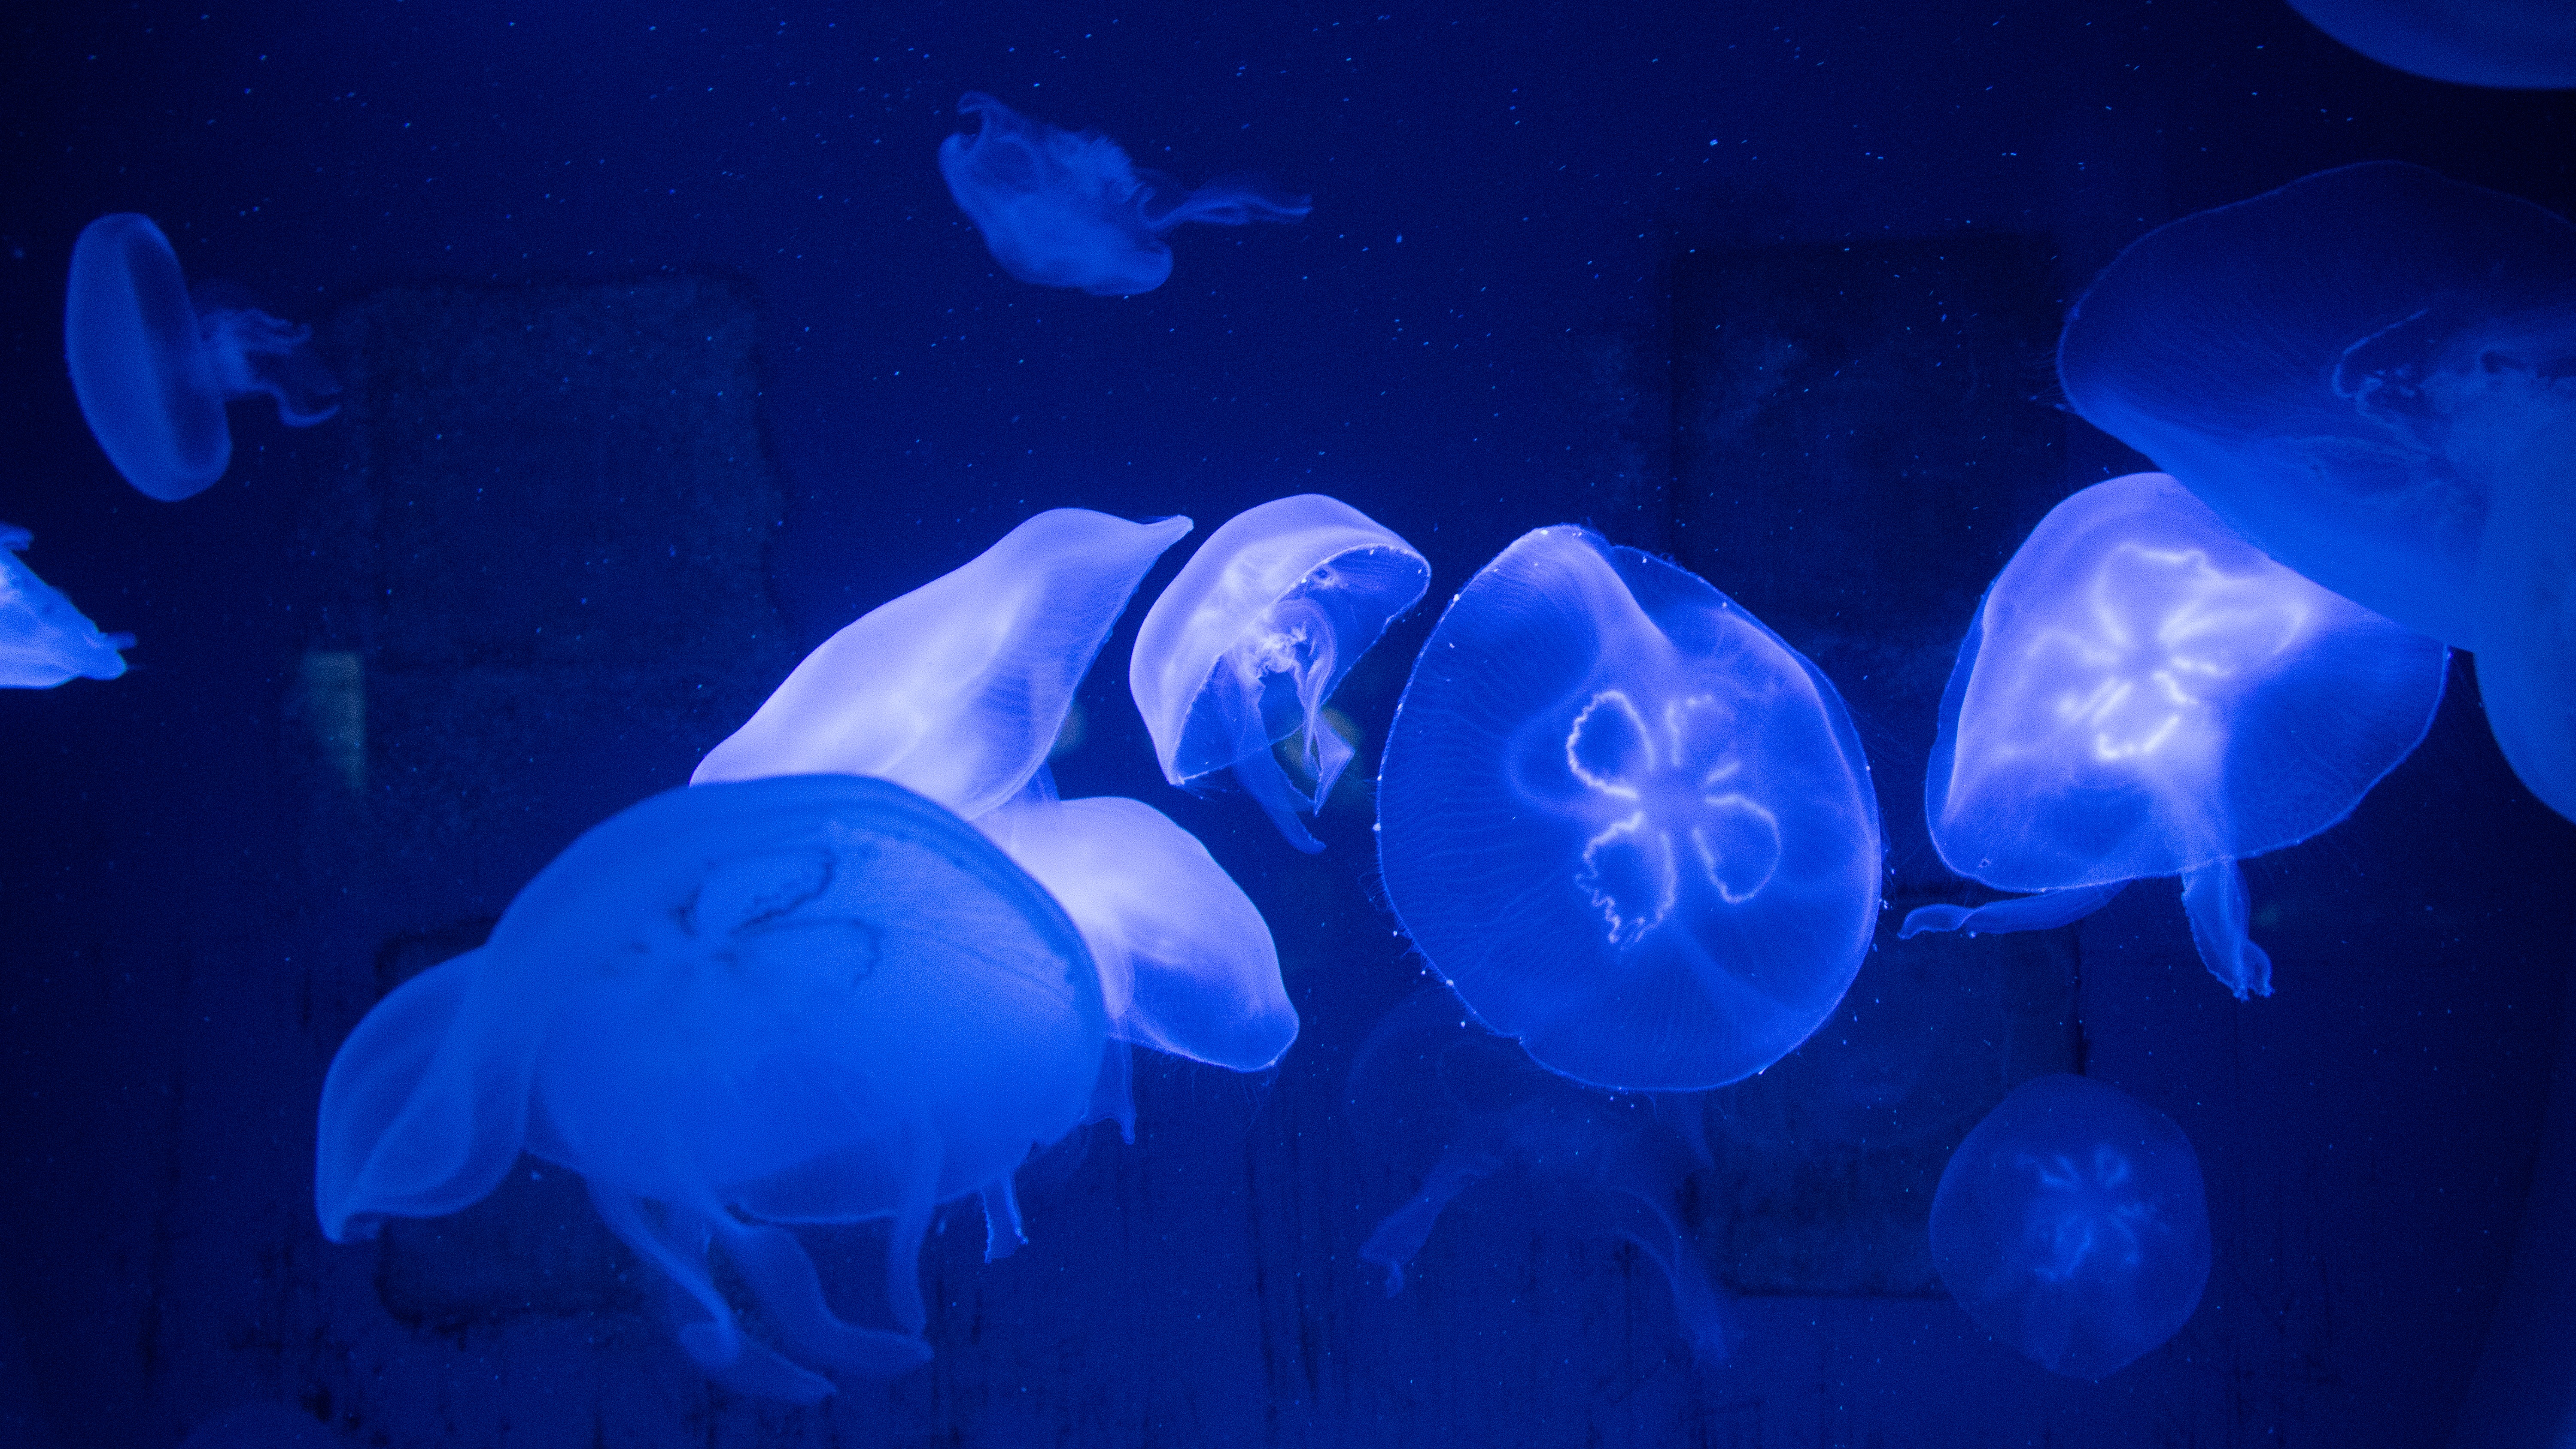 Cool Backgrounds jellyfish, nature, underwater world Tentacles